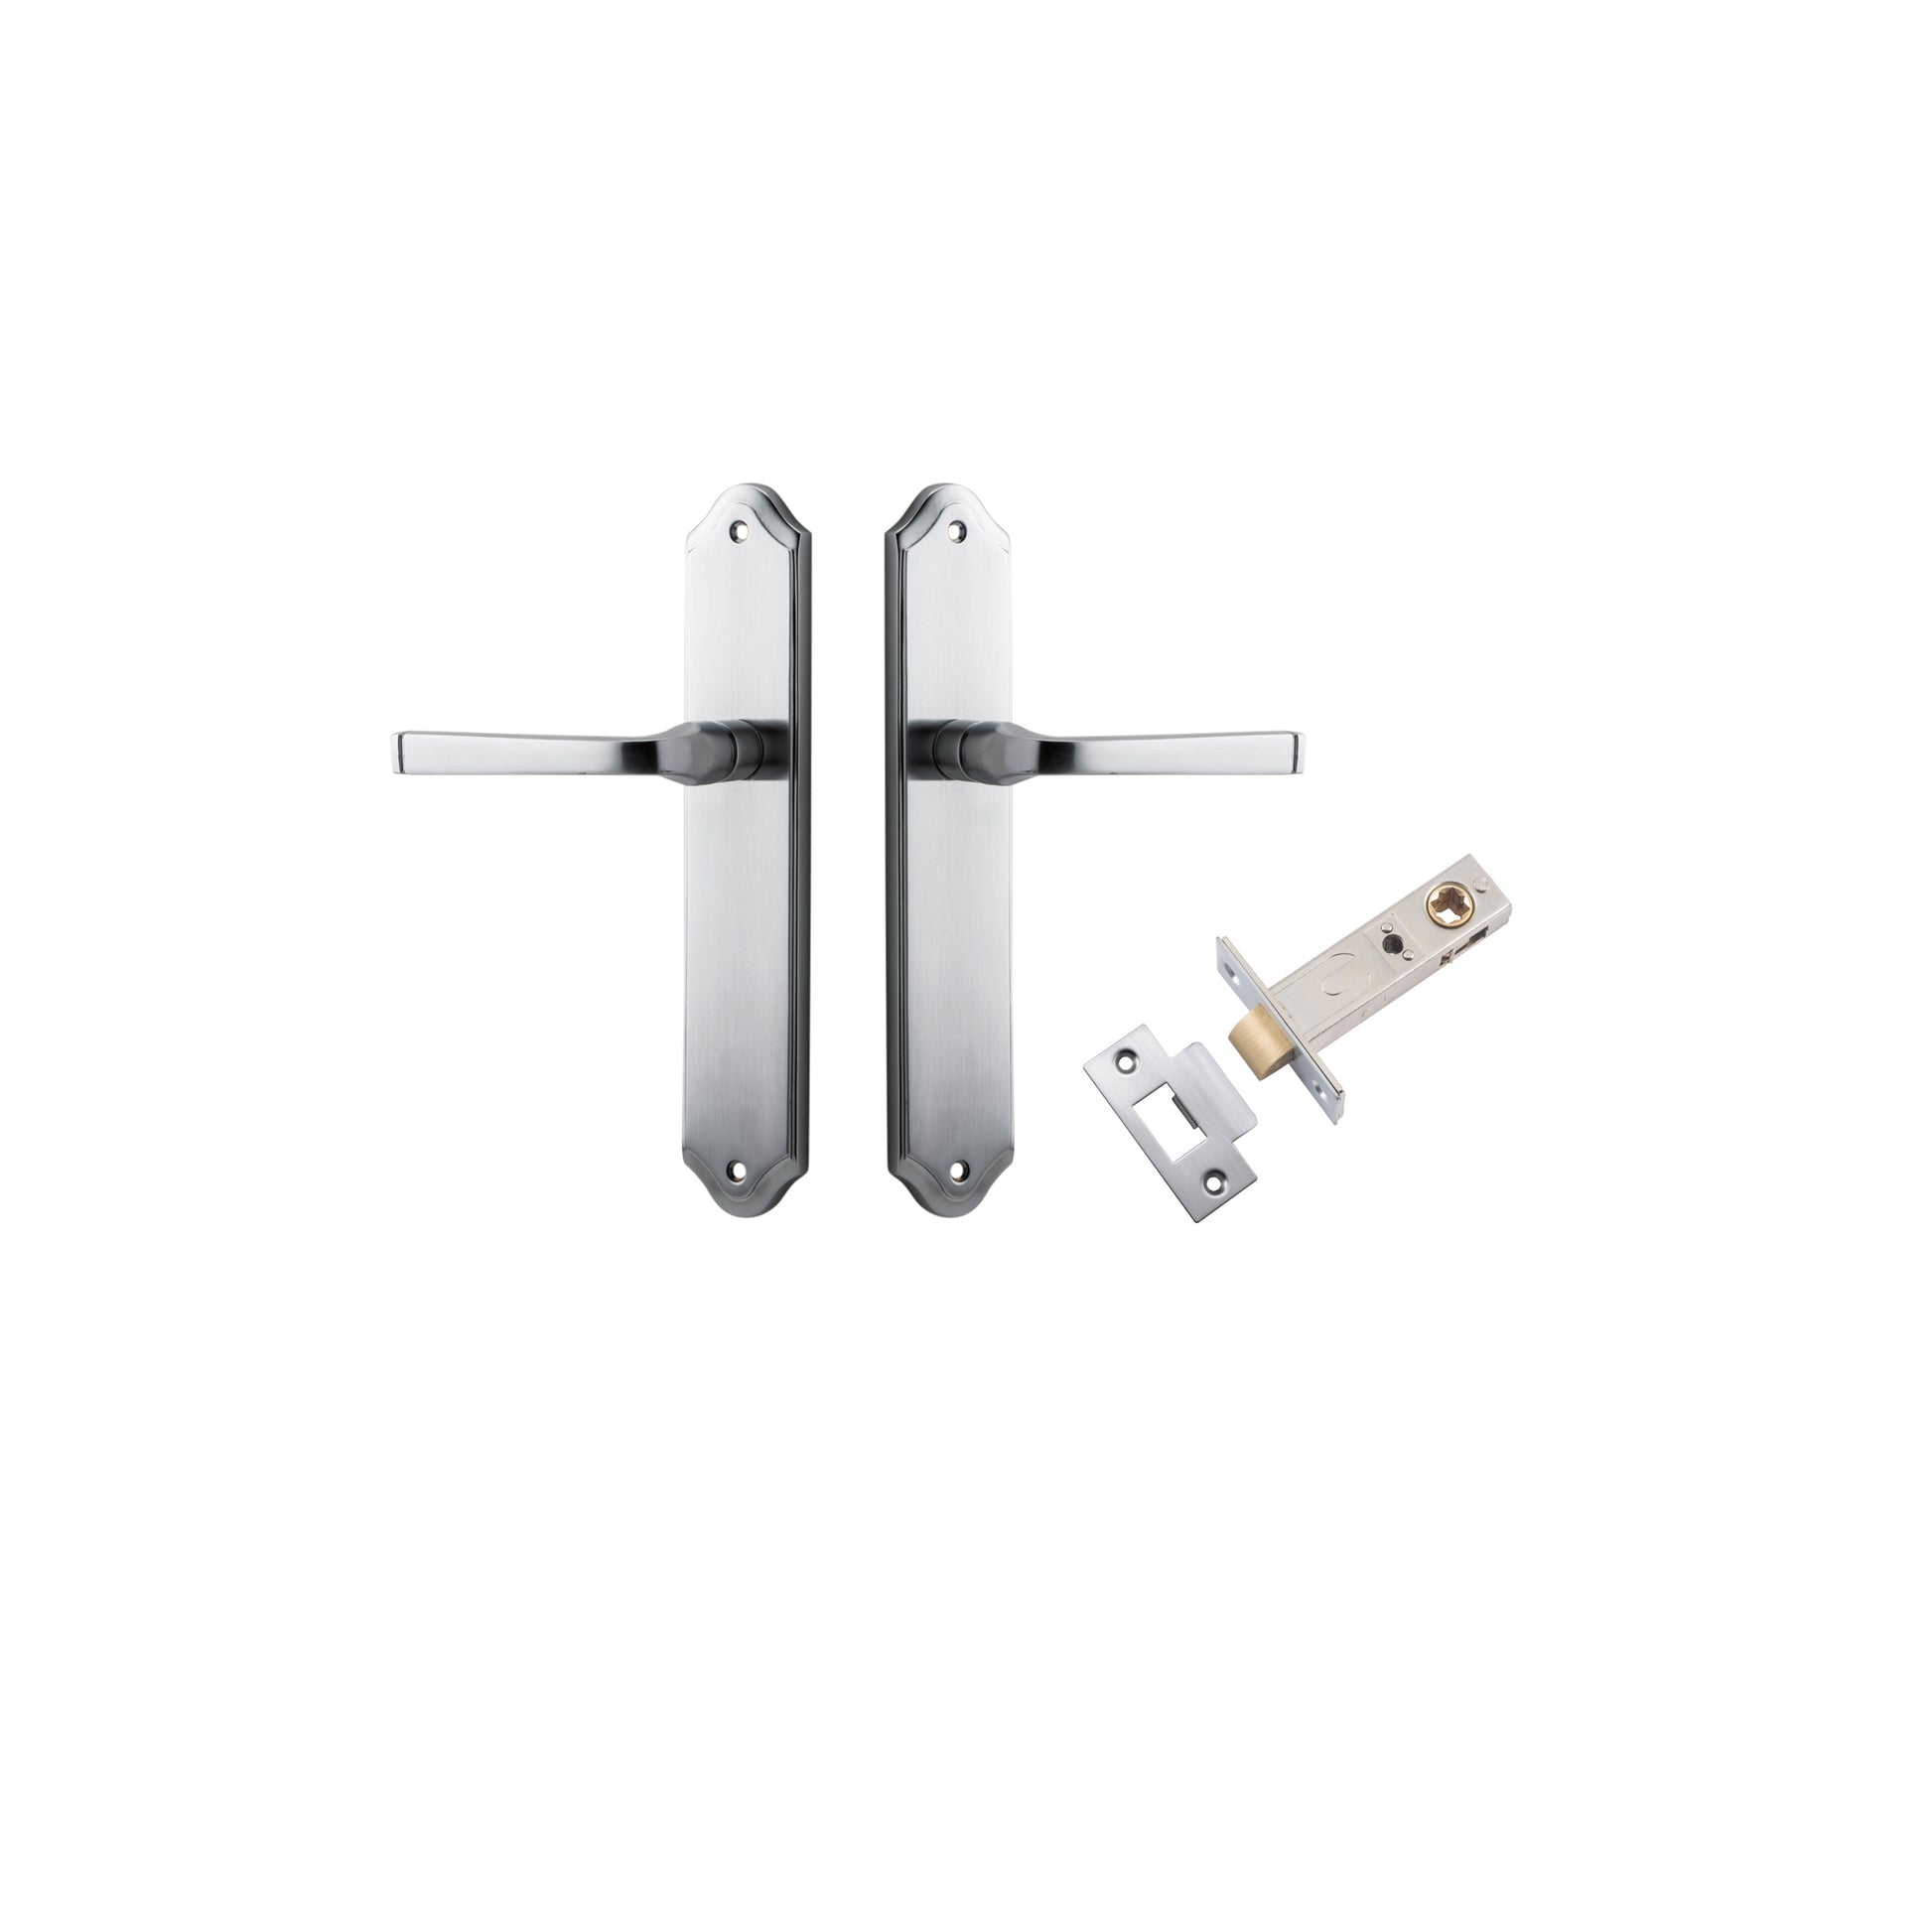 Door Lever Annecy Shouldered Latch Brushed Chrome H240xW50xP65mm Passage Kit, Tube Latch Split Cam 'T' Striker Brushed Chrome Backset 60mm in Brushed Chrome